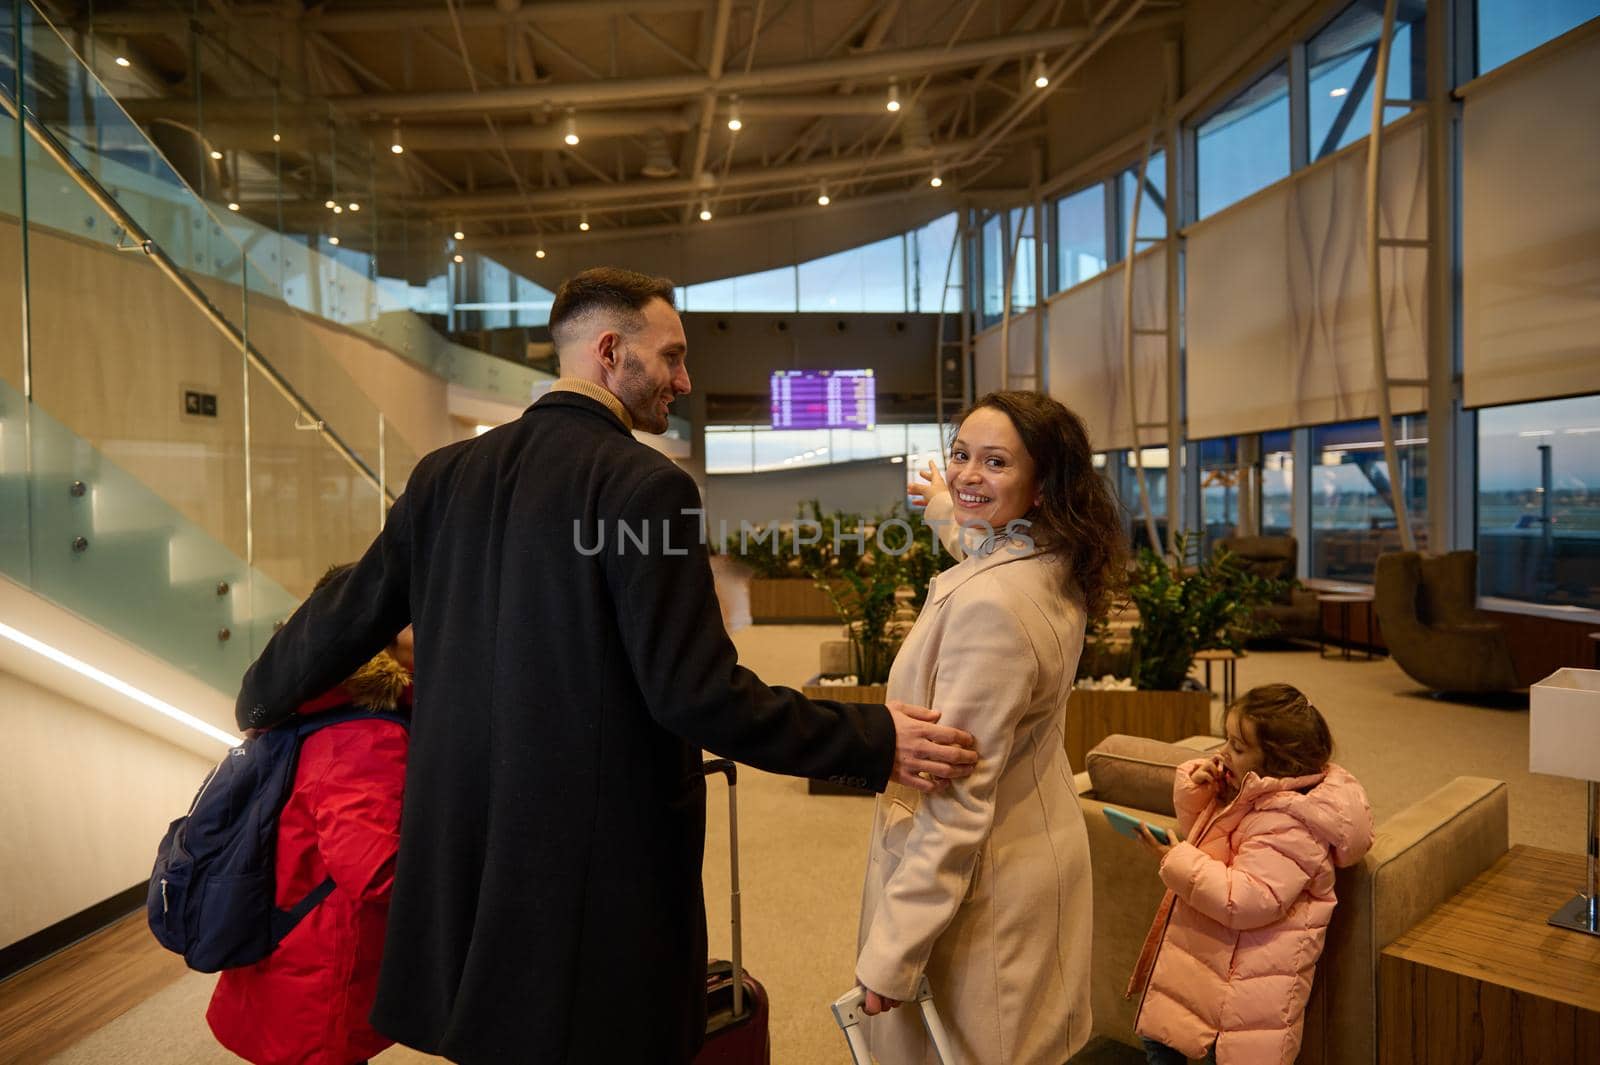 Loving father hugs his son and wife as she smiles, looking over her shoulder, pointing to timetable information panel, checking the flight at the airport departure terminal. Family air travel concept by artgf